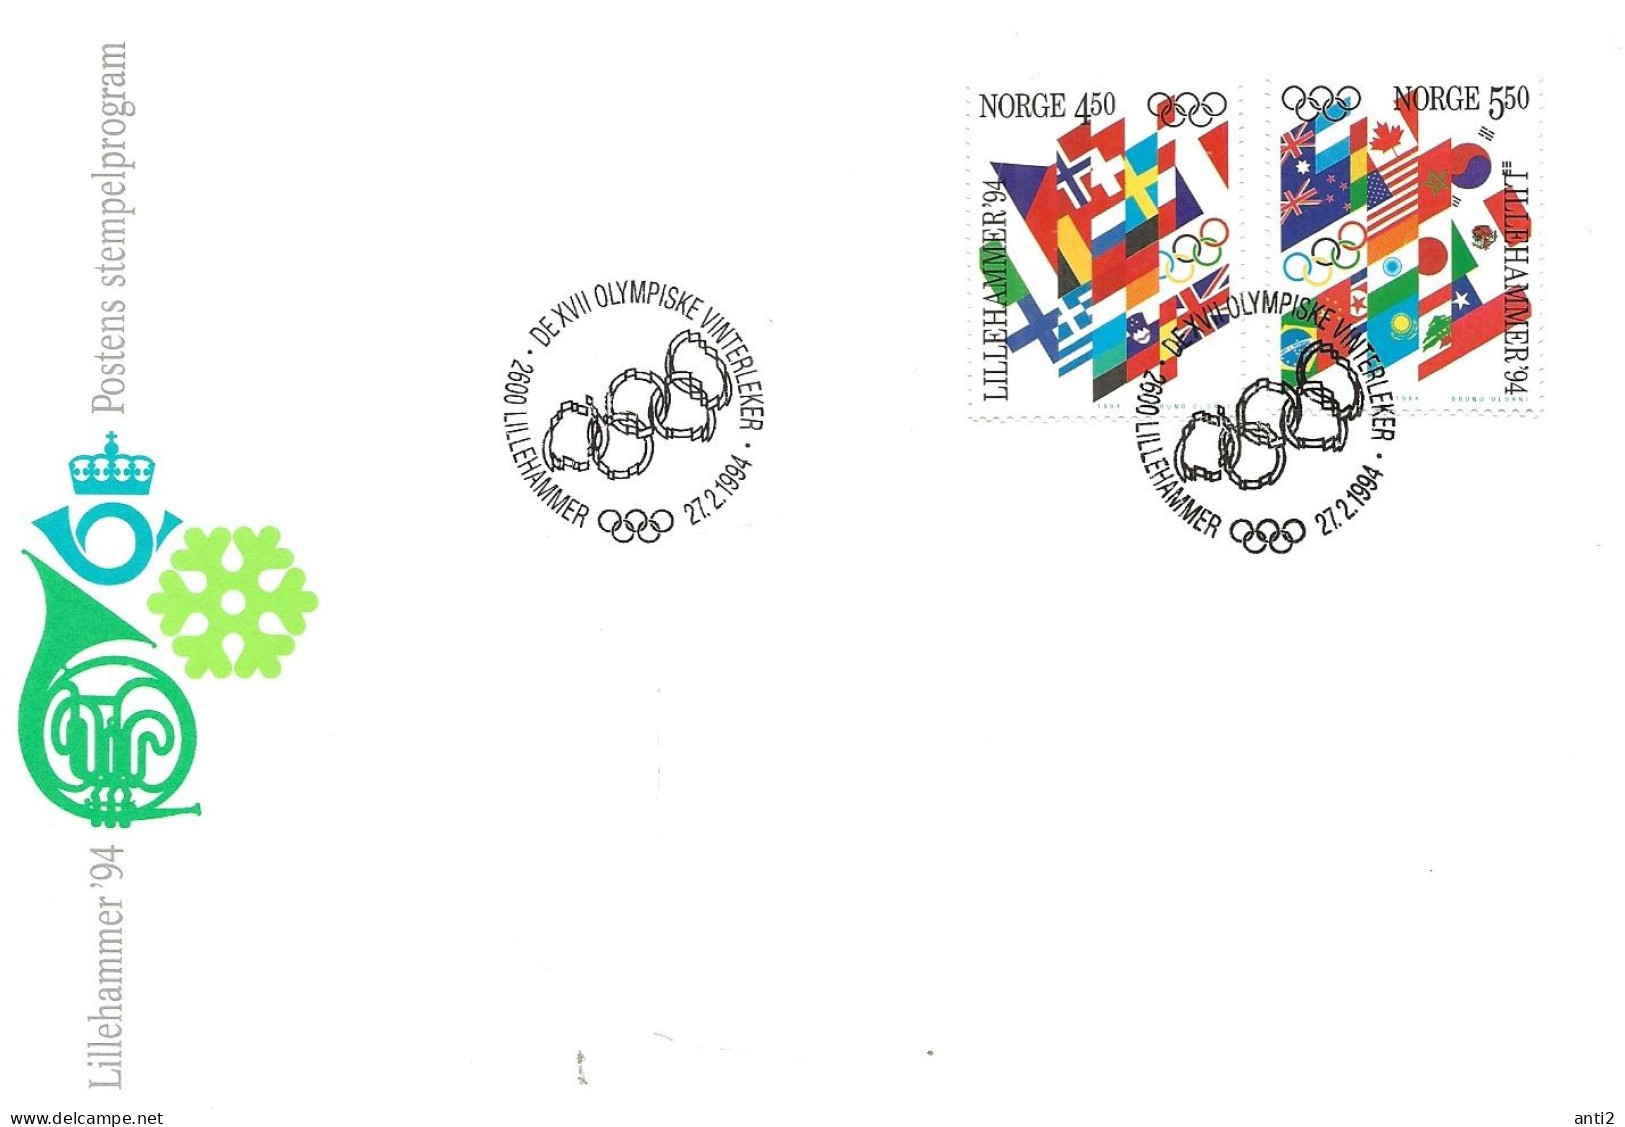 Norway Norge 1994 Olympic Winter Games Lillehammer 1994, Flags Mi 1145-1146 Cover Cancelled 7.2.1994 - Storia Postale